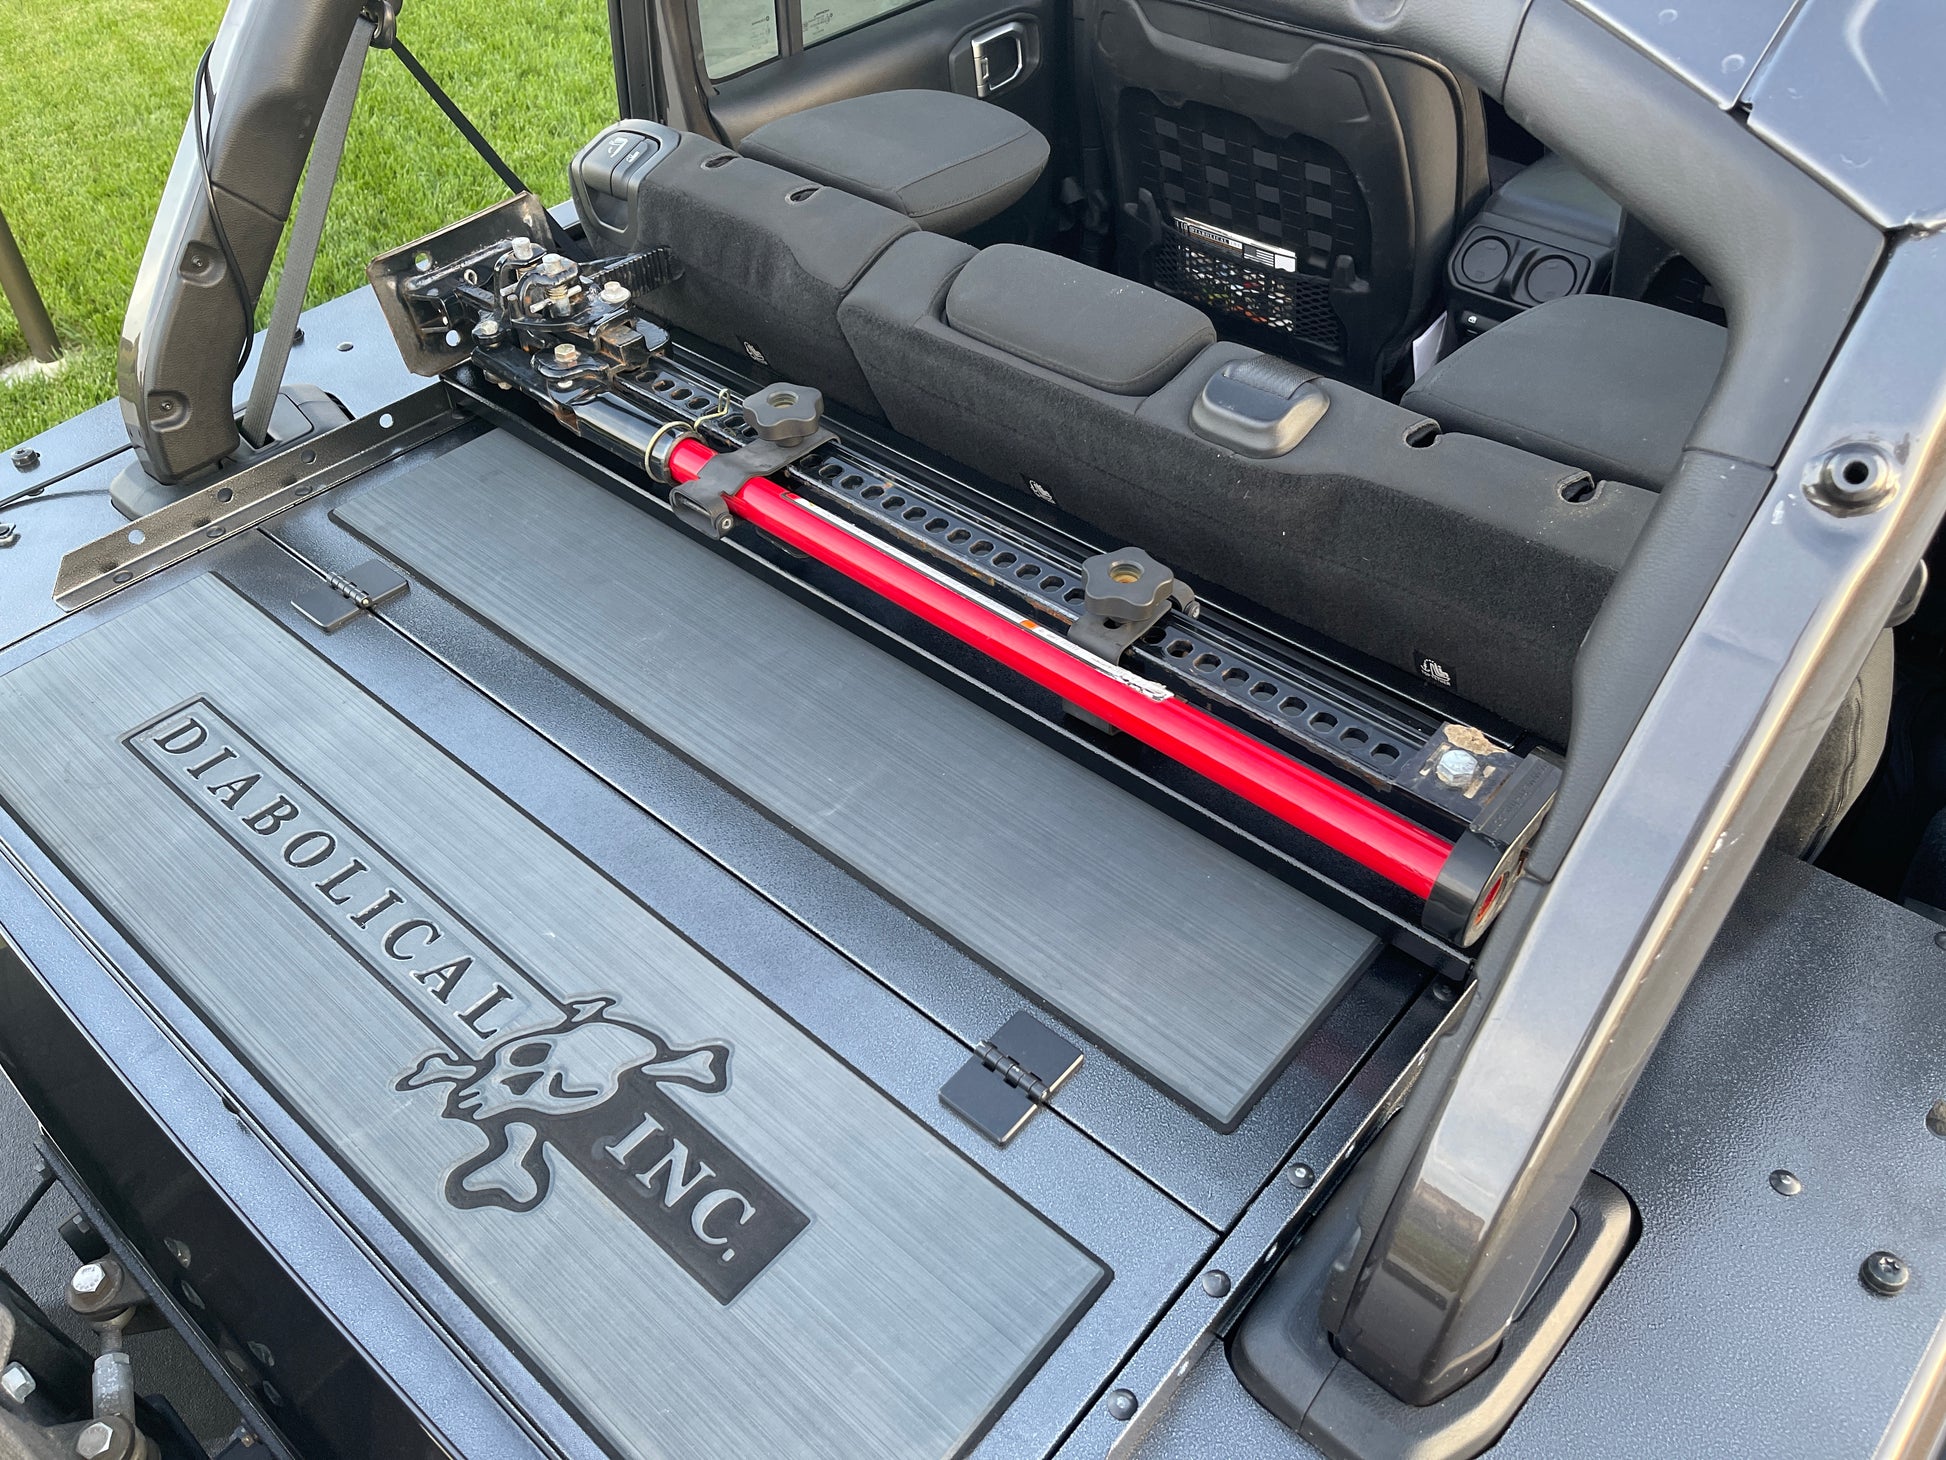 Image of a Jeep Wrangler JKU with a Diabolical, Inc. Slipstream security enclosure and foam deck pads with the Rail Rack accessory mount installed with a HiLift Jack.